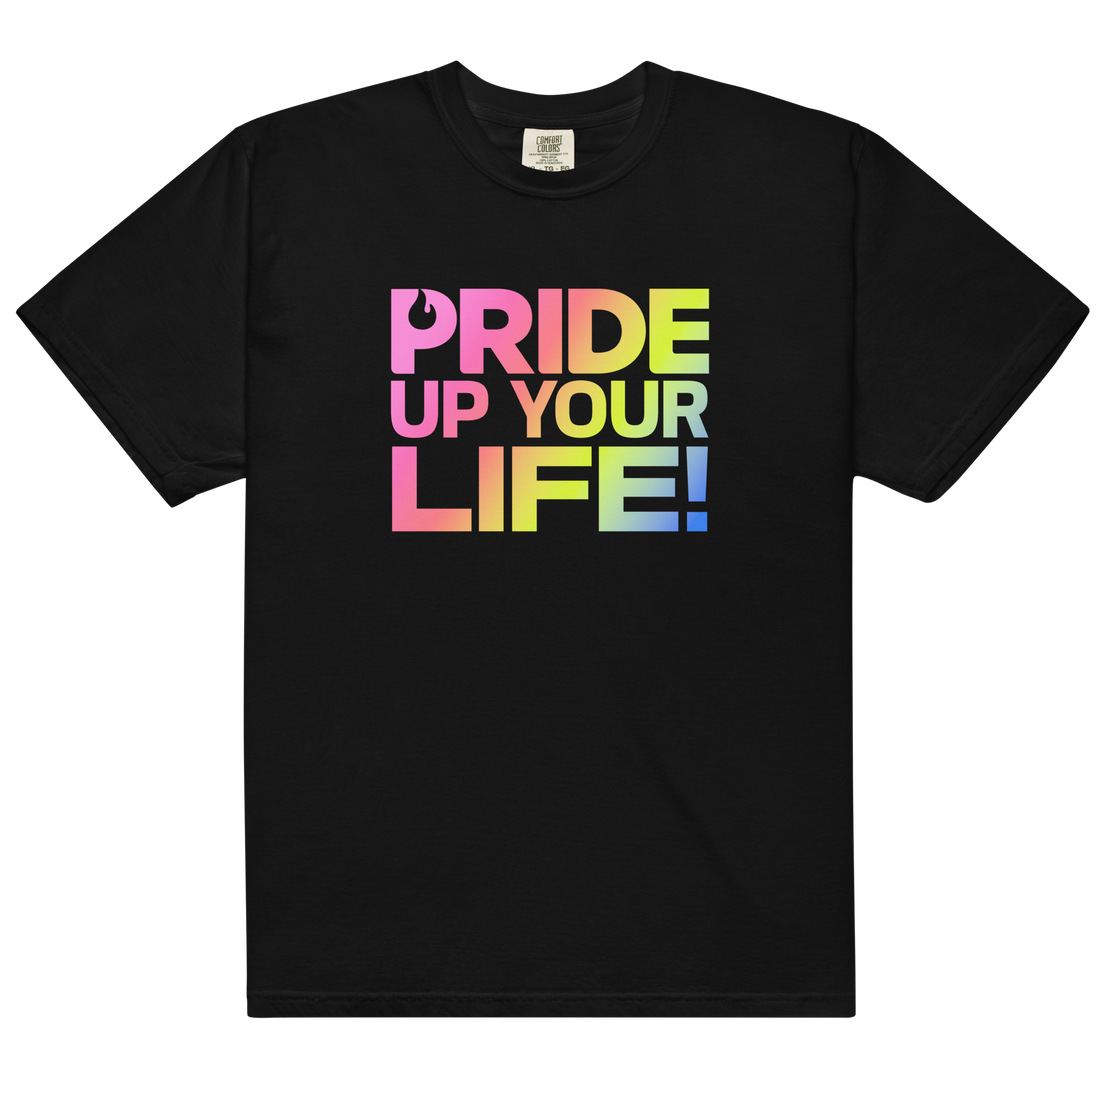 Pride Up Your Life Unisex Garment-dyed Heavyweight T-shirt